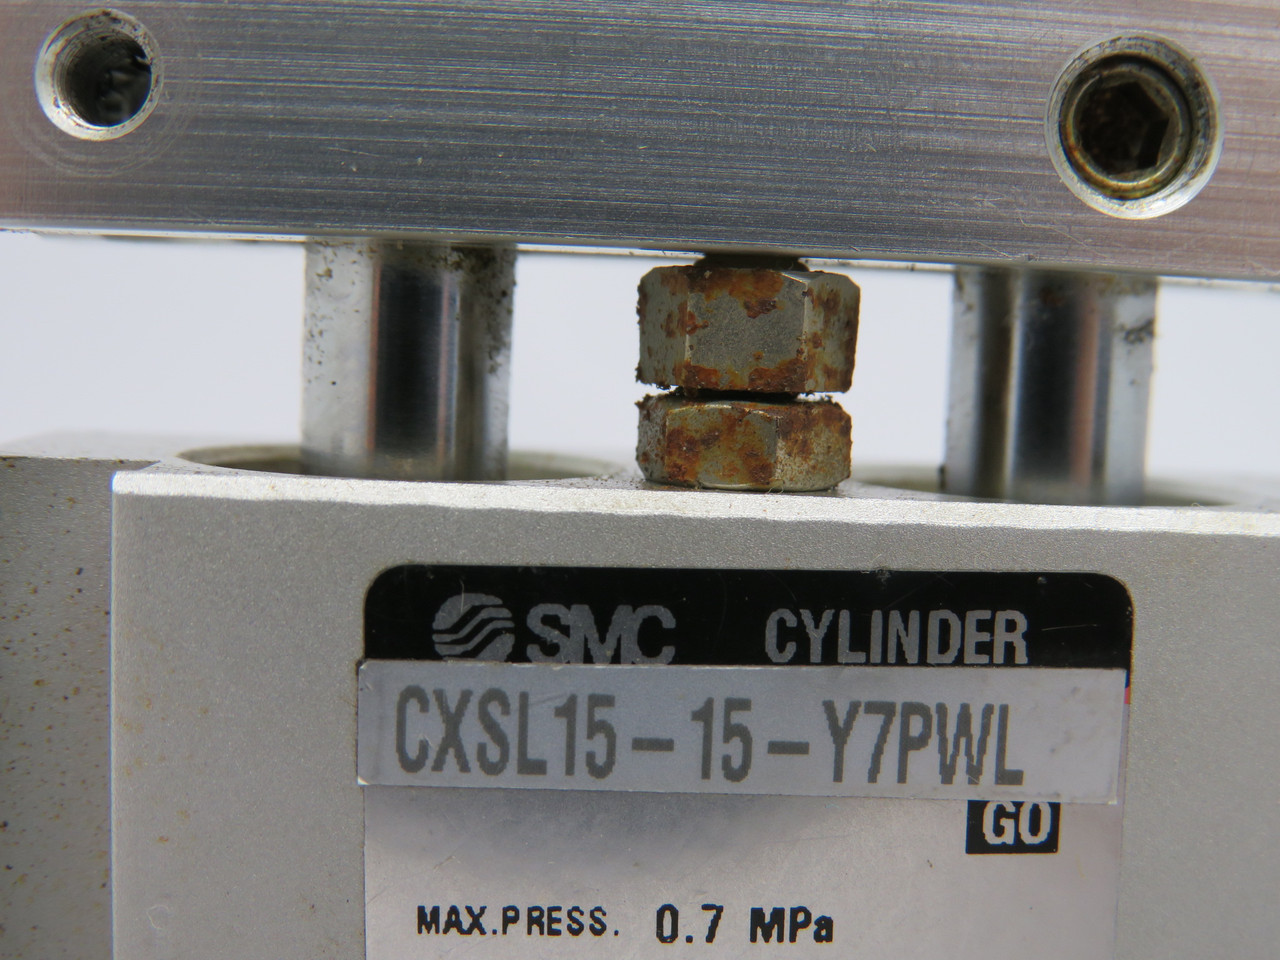 SMC CXSL15-15-Y7PWL Guided Cylinder 15mm Bore 15mm Stroke COSMETIC DMG USED